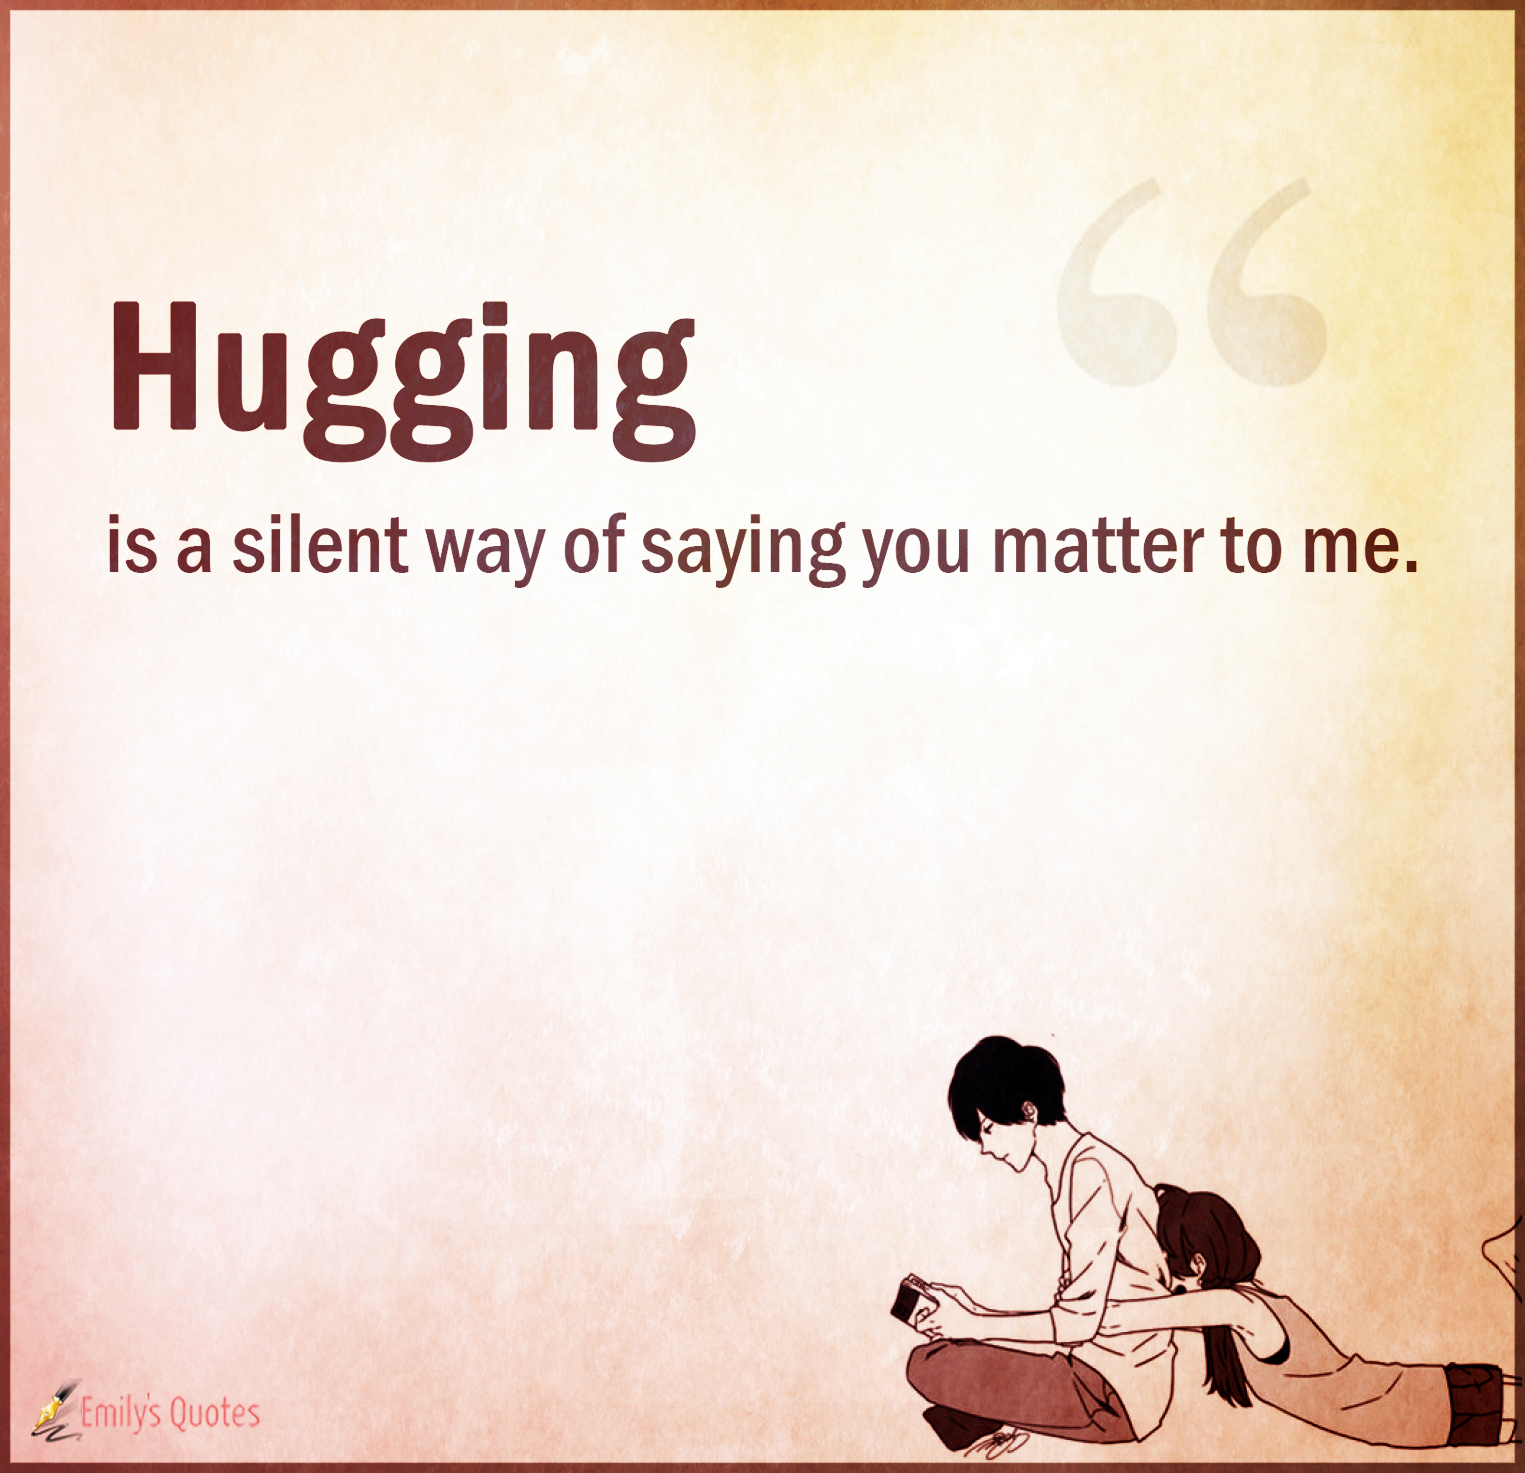 Hugging is a silent way of saying you matter to me